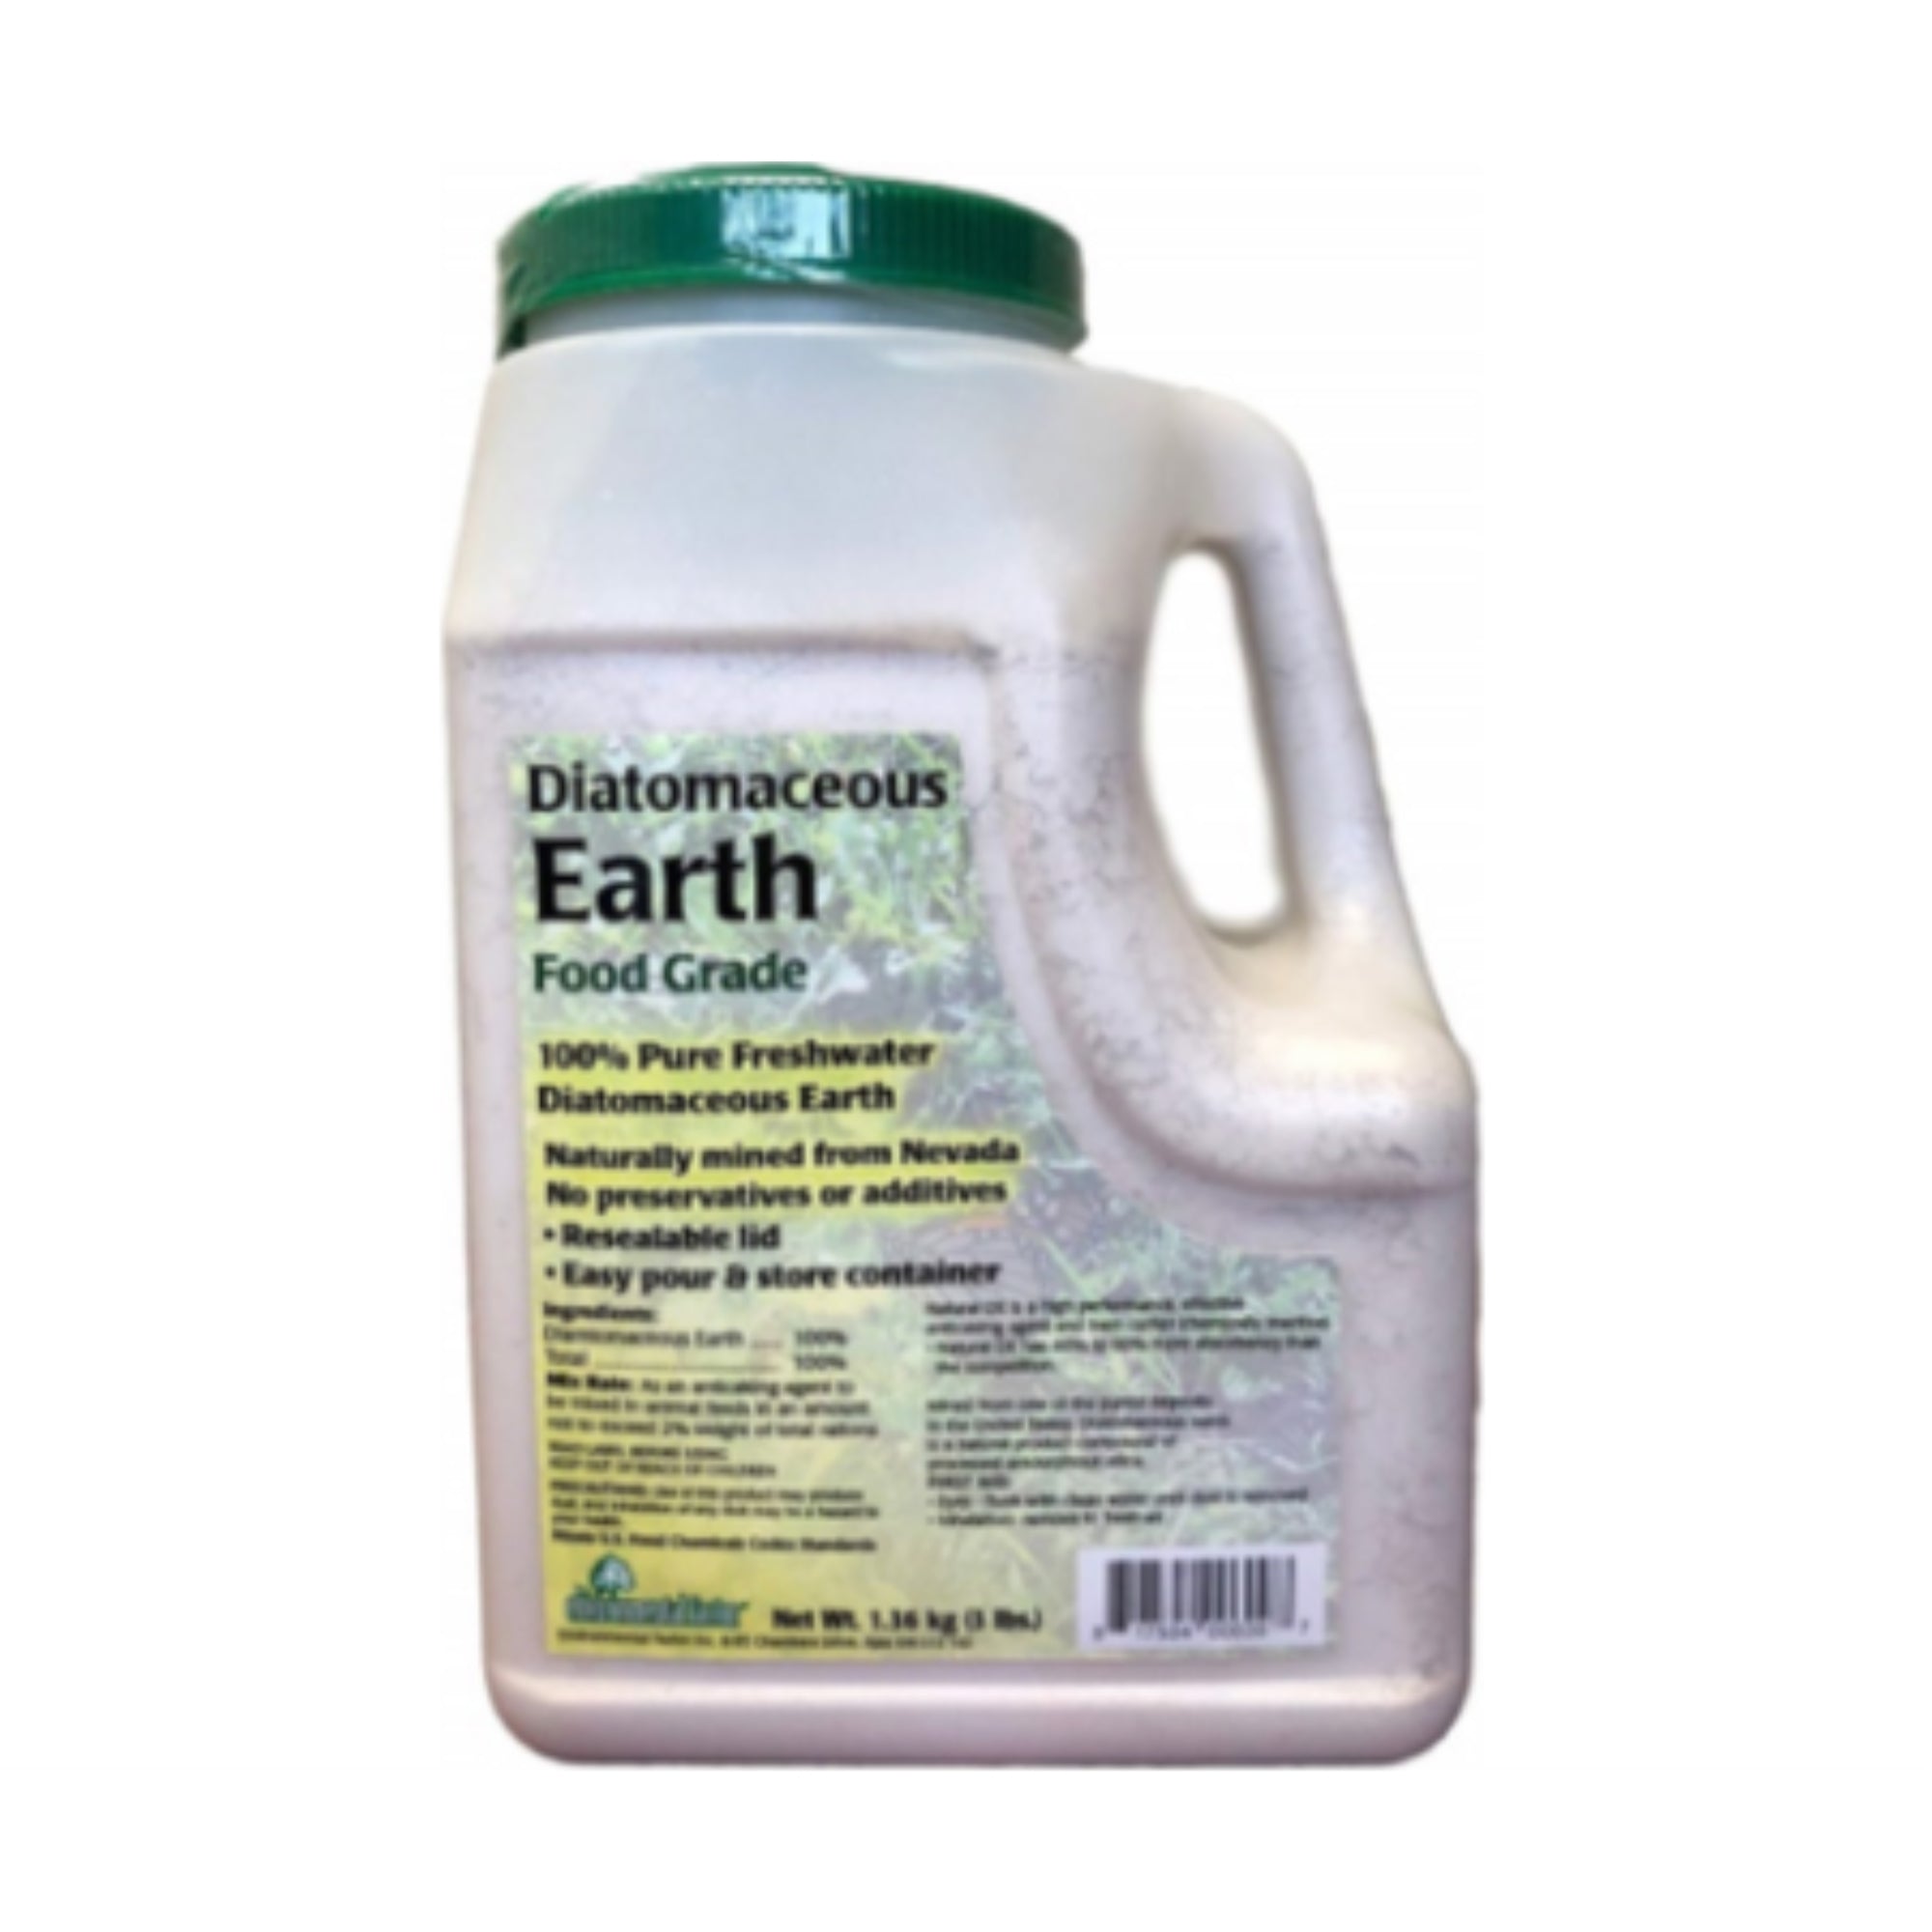 The Environmental Factor Diatomaceous Earth Food Grade Insecticide Powder for Insects with an Exoskeleton, 3lb Shaker Bottle